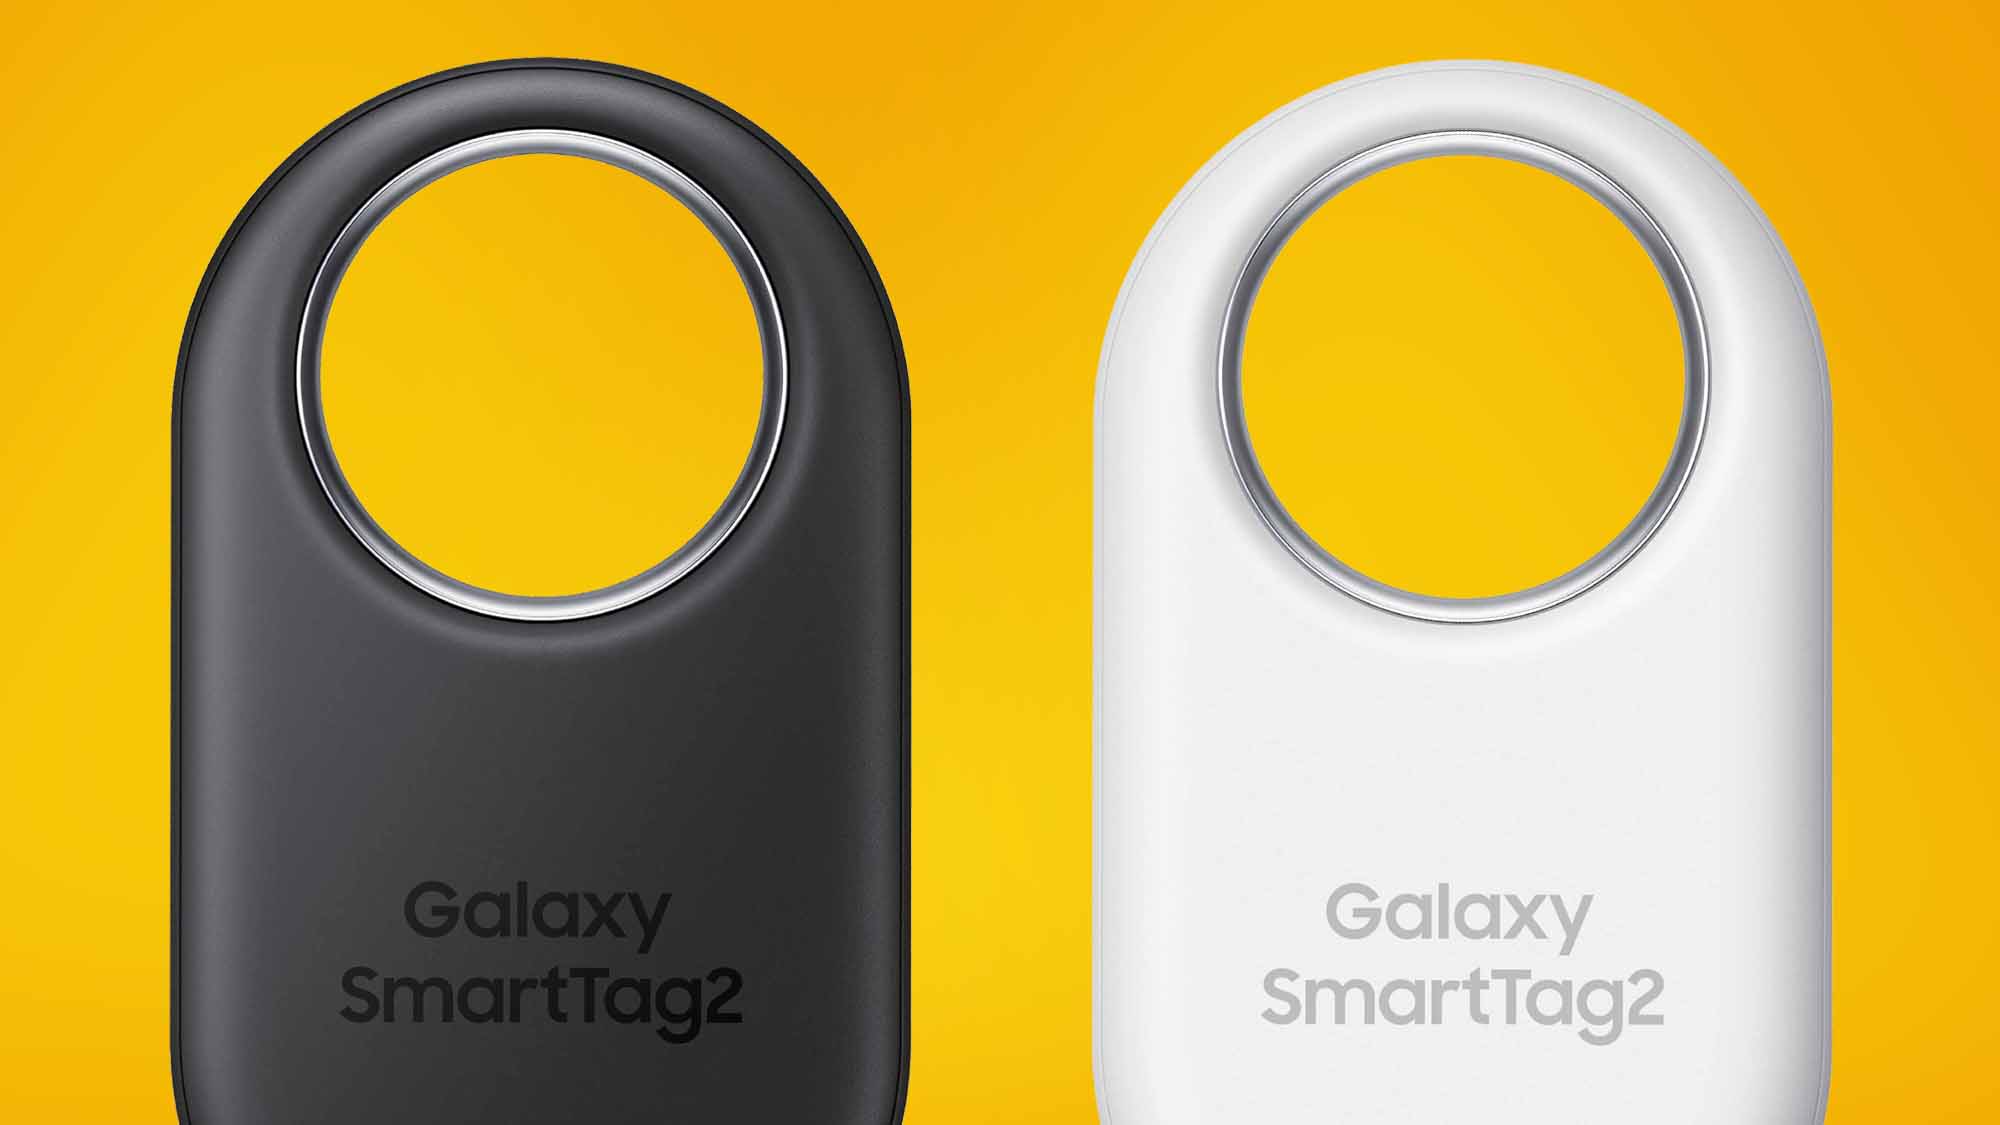 The Samsung Galaxy SmartTag2 is here, but where is Google's true